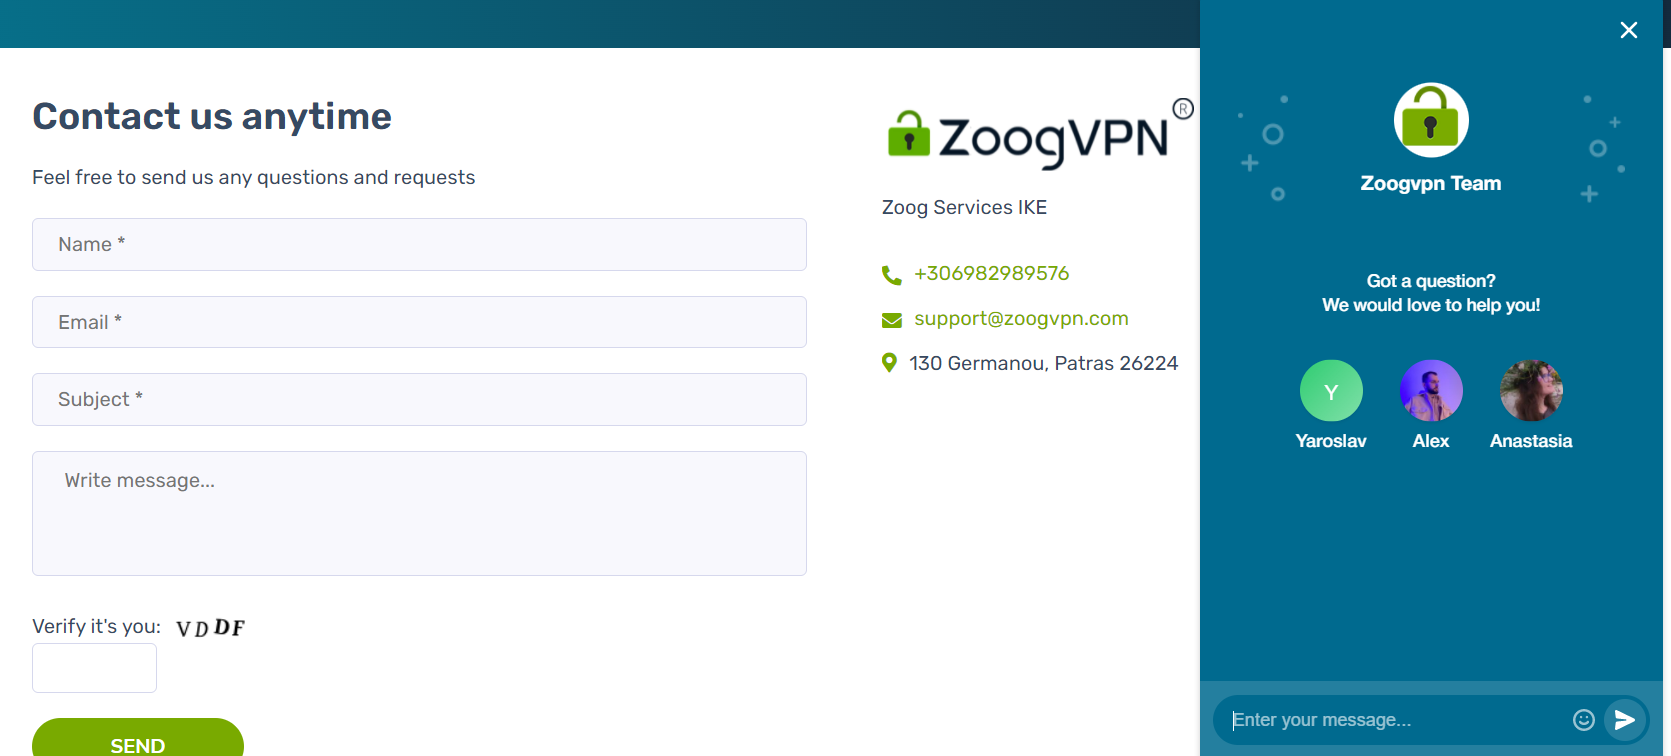 zoog-vpn-live-chat-support-in-UAE